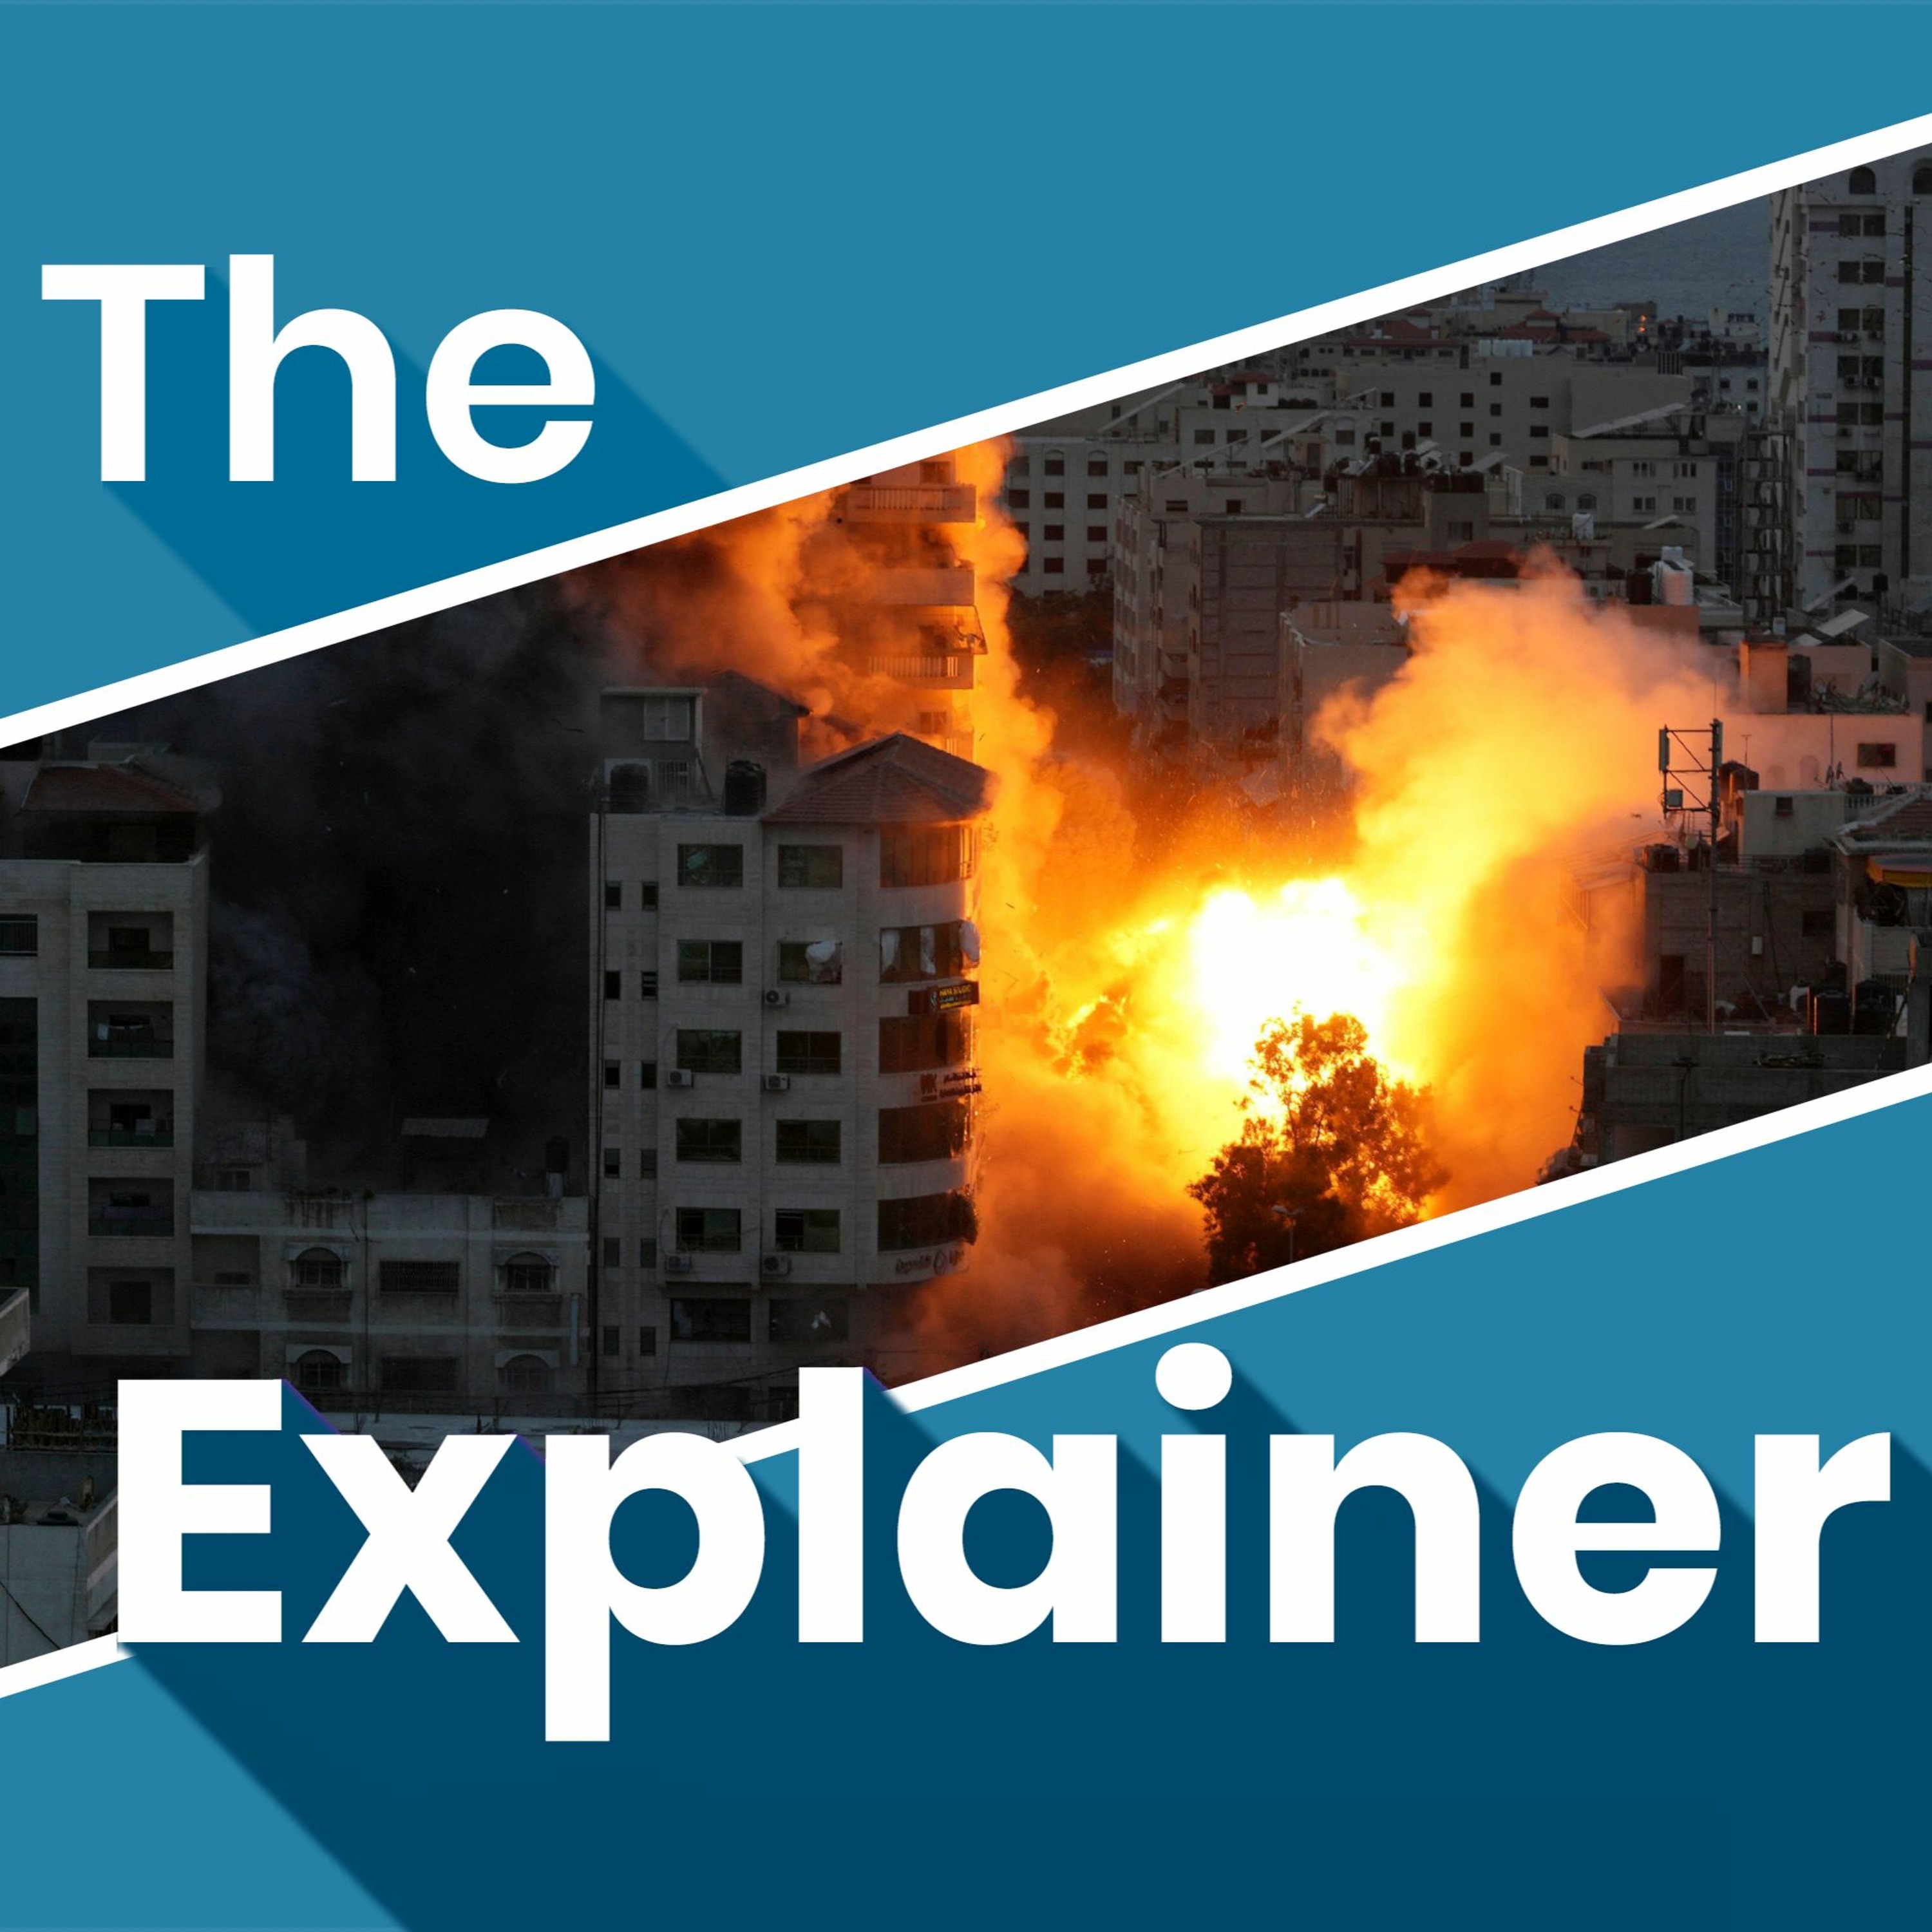 Israel and Gaza - what are the big questions that need to be answered?